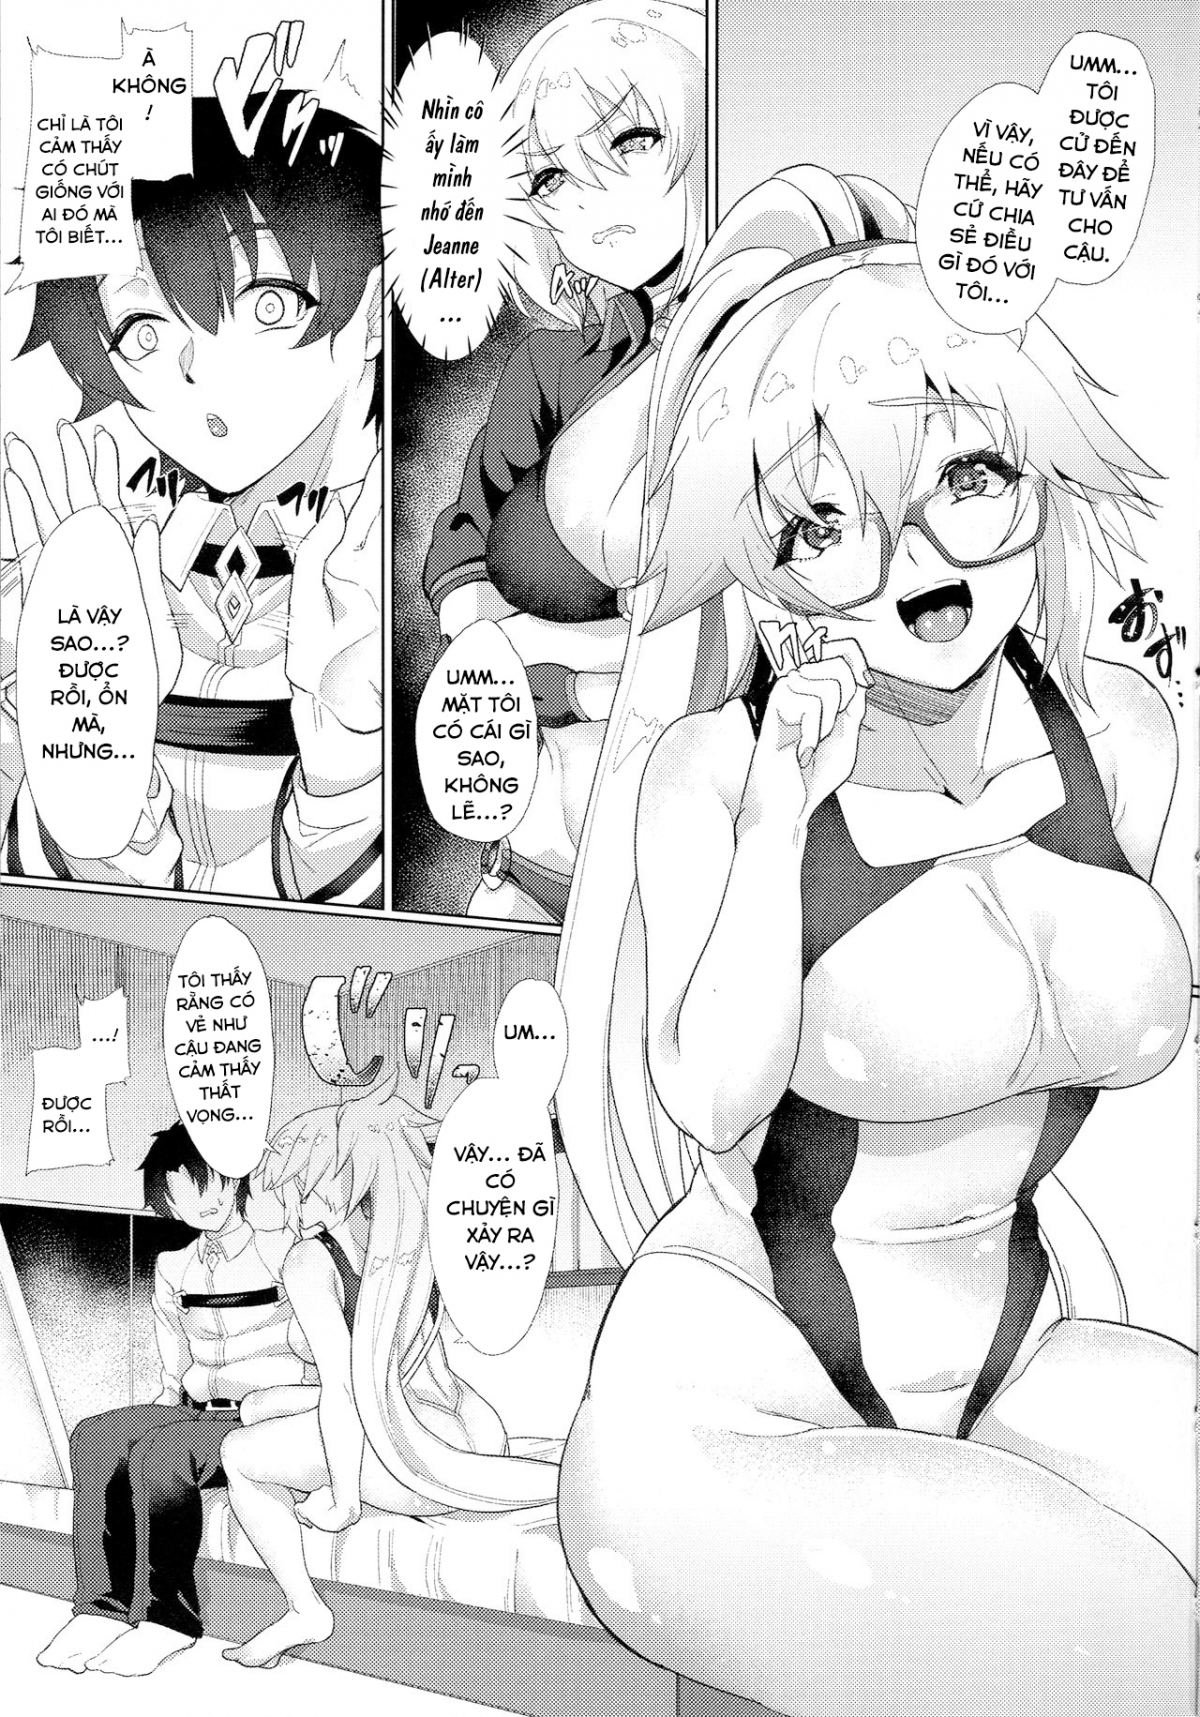 Xem ảnh Even Knowing That It's A Trap, I (An Ntr Victim) Can't Resist My Friend's Touch-Heavy Jeanne! - One Shot - 1603685667654_0 - Hentai24h.Tv